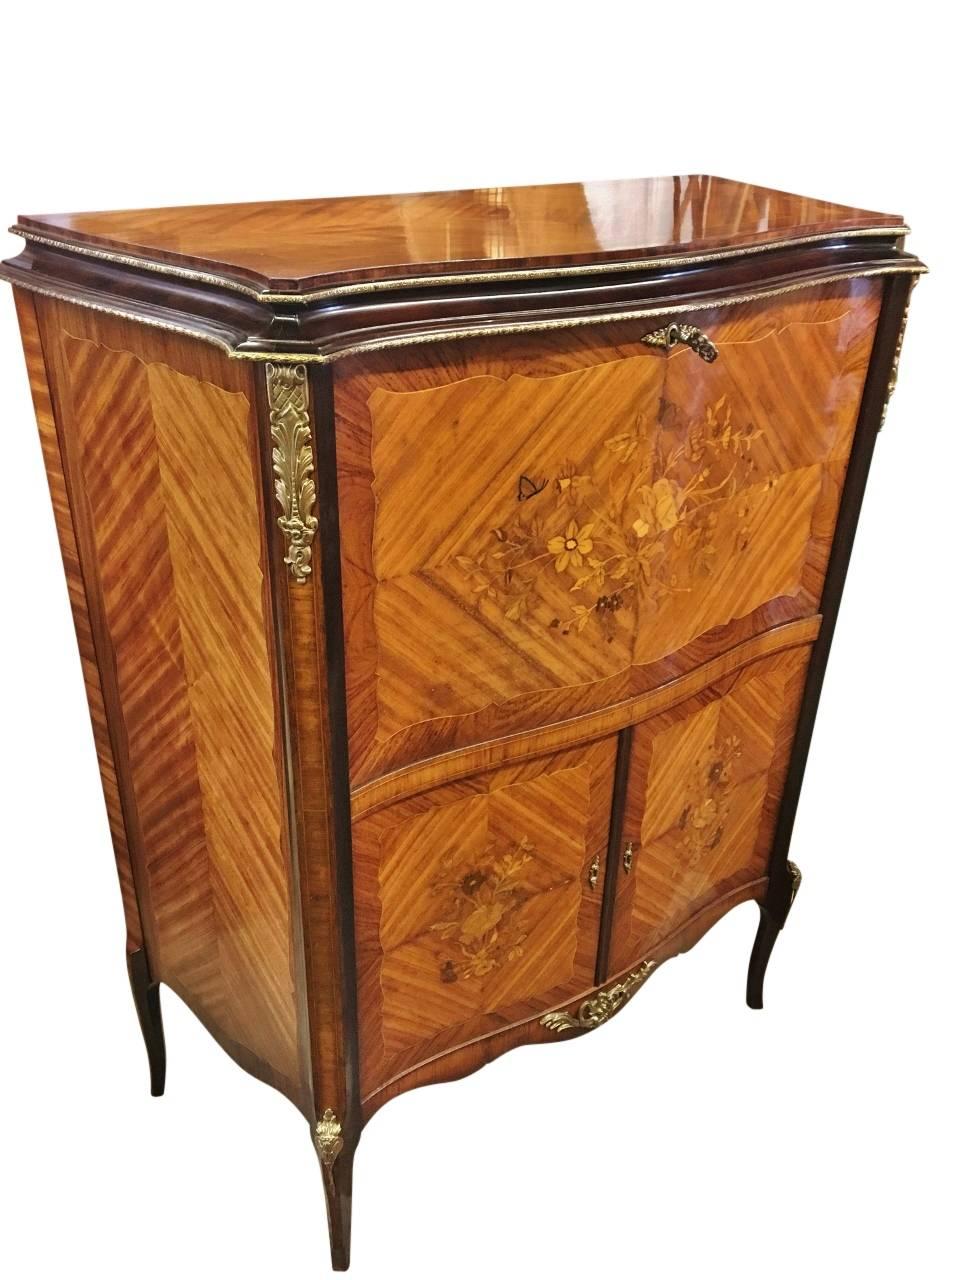 Ormolu Cocktail and Drinks Cabinet, French, circa 1930